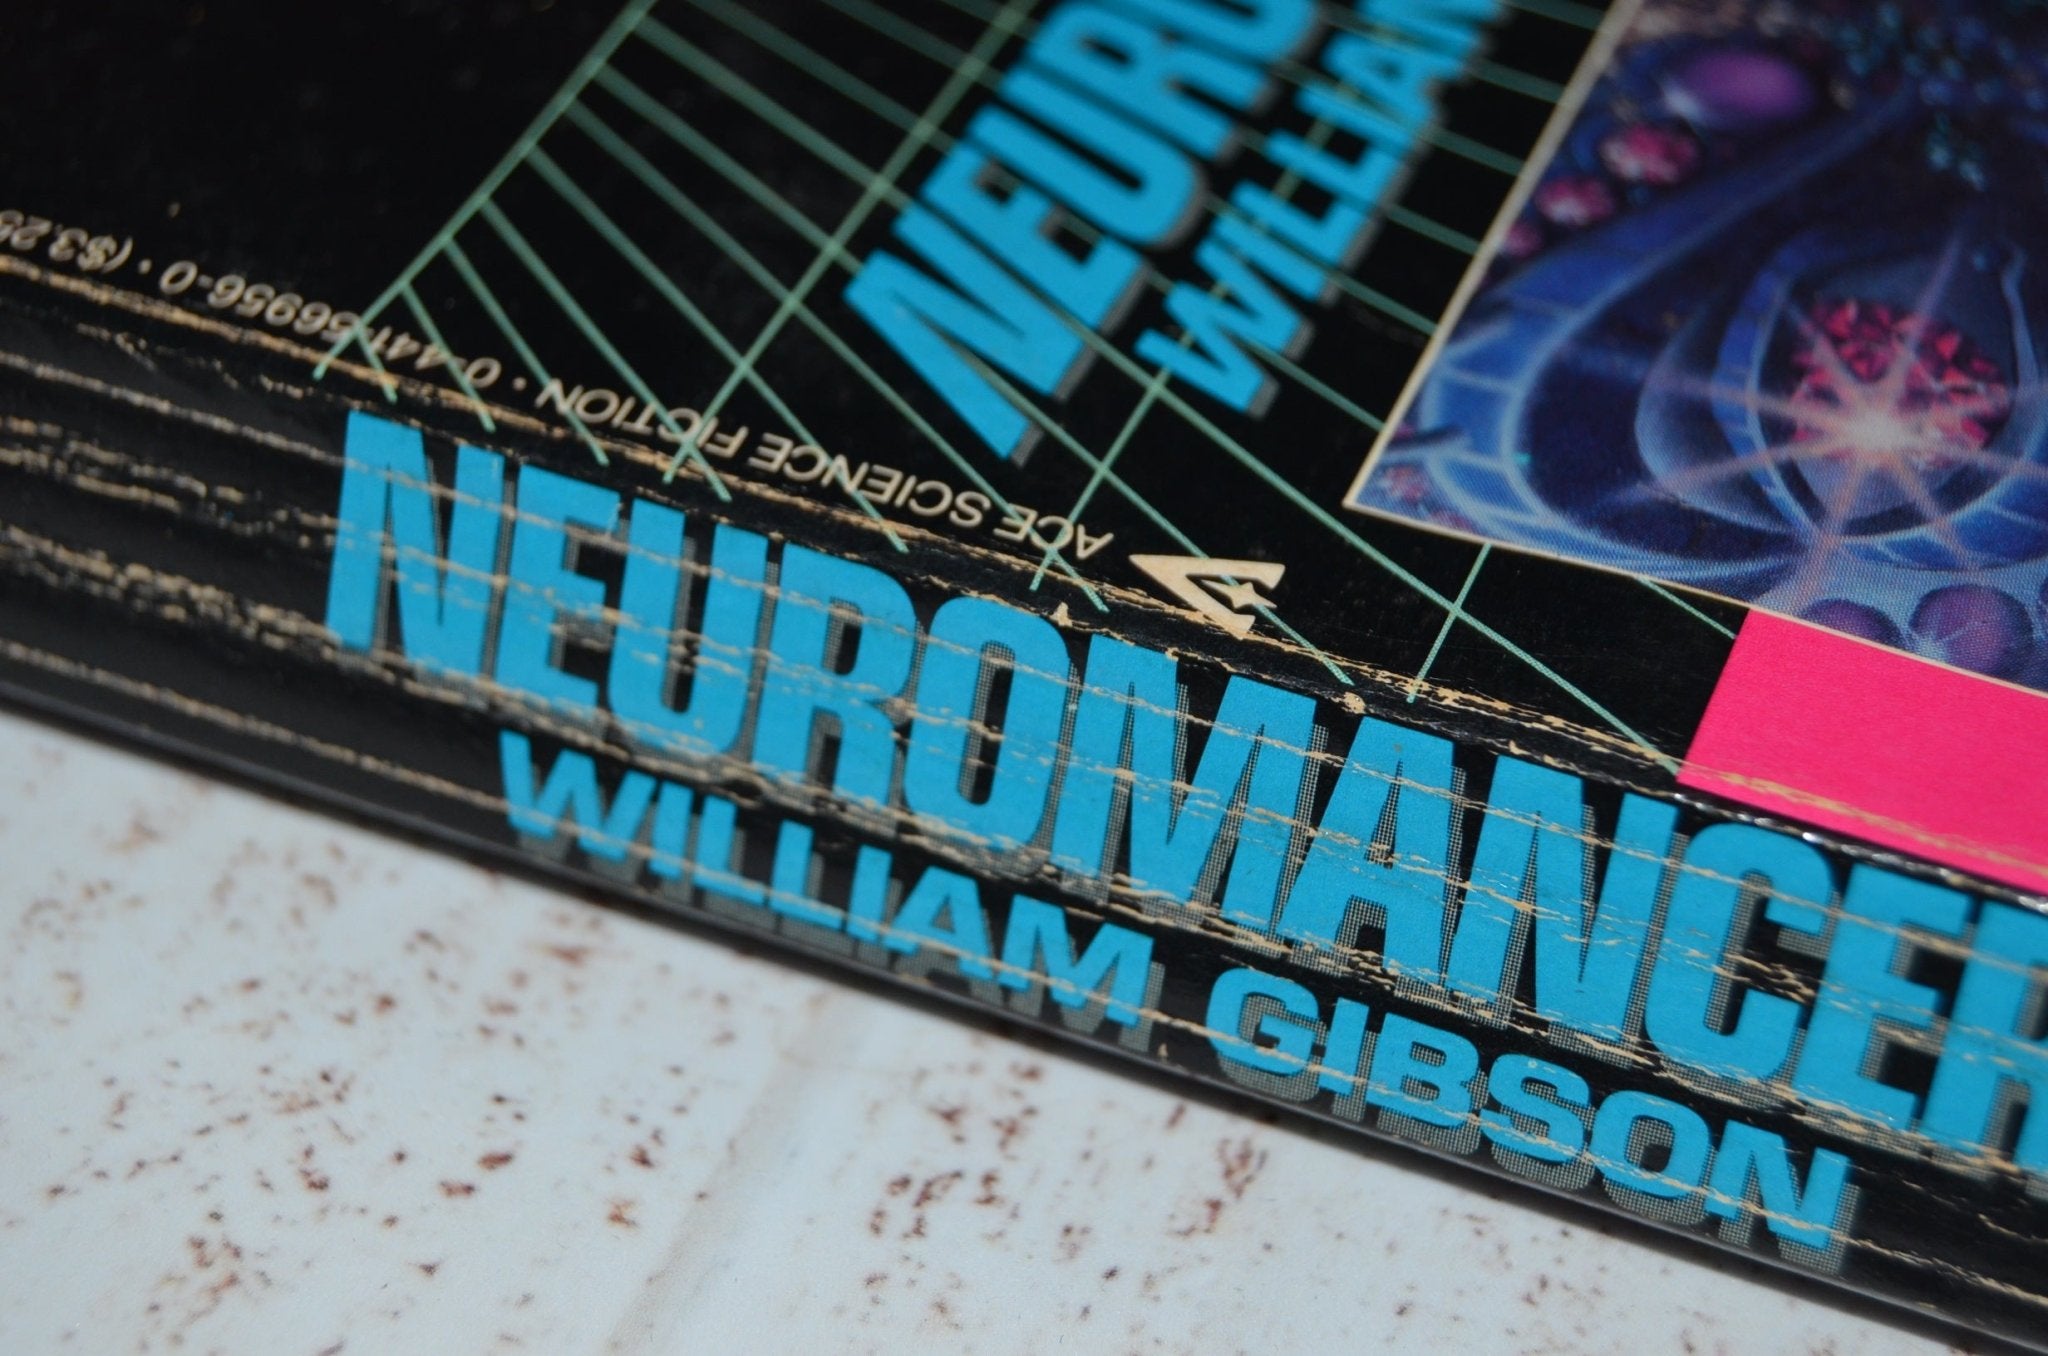 First Edition First Printing – Neuromancer by William Gibson 1984 - Brookfield Books